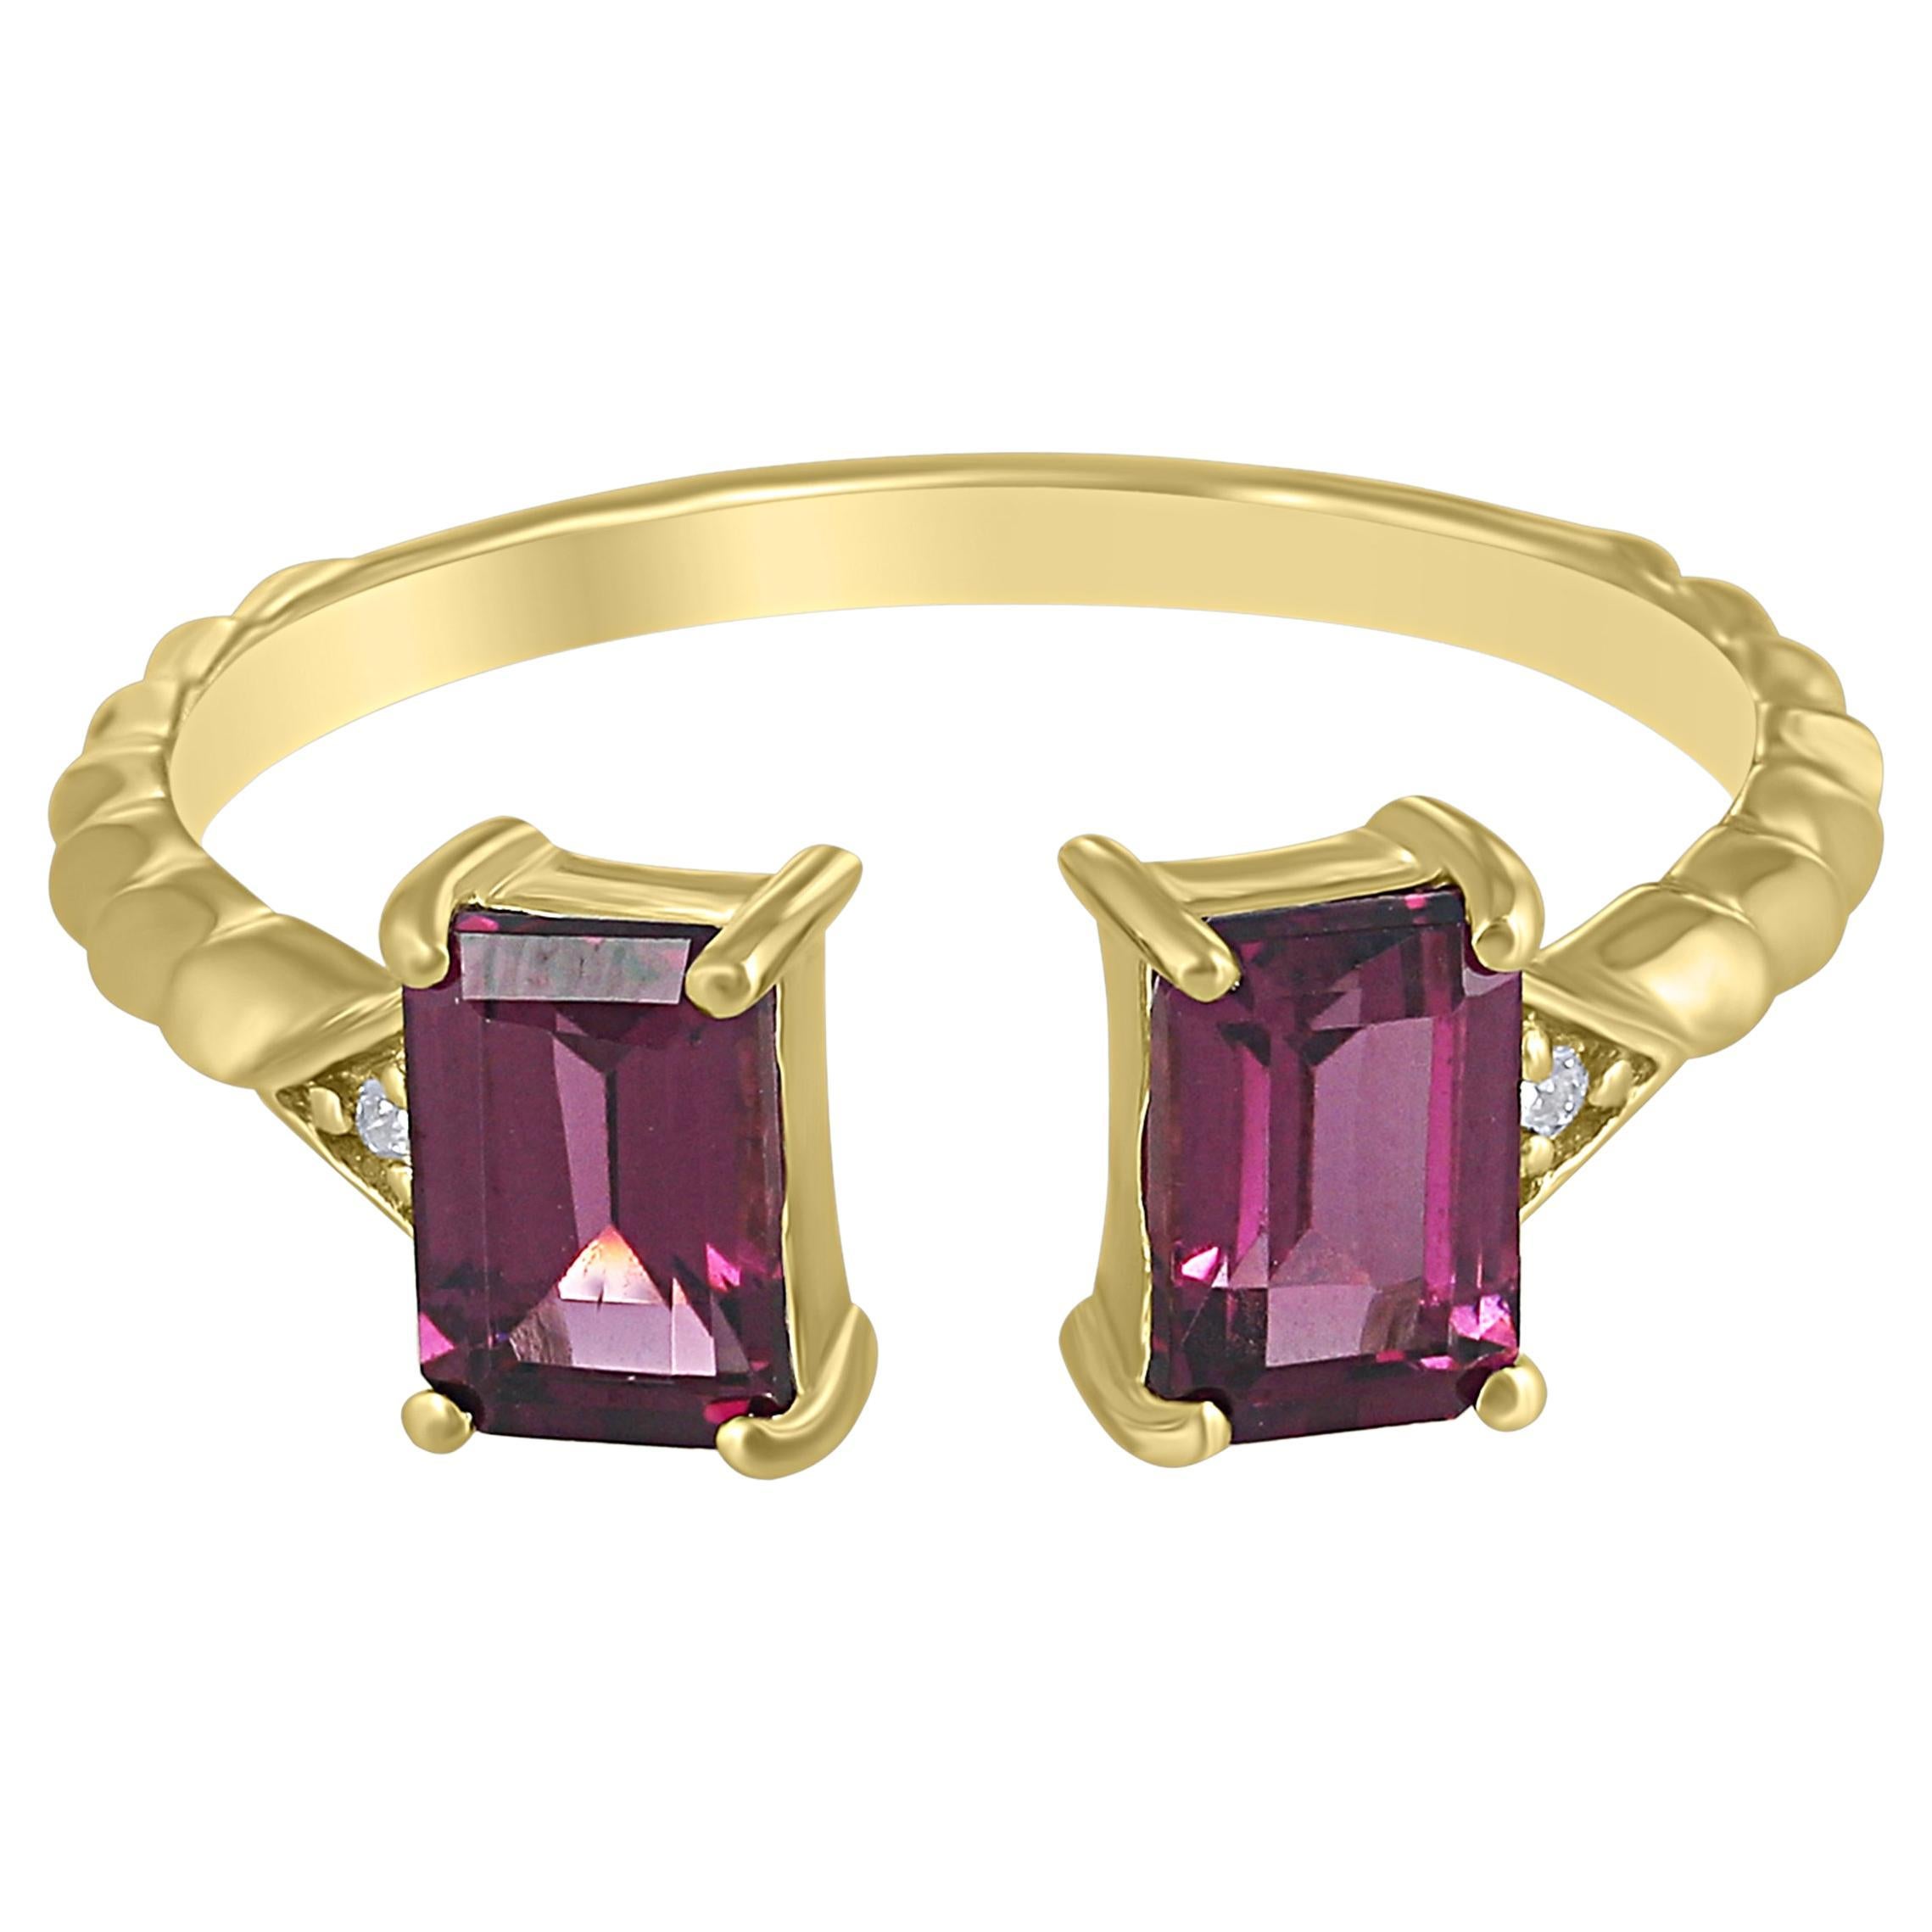 Gemistry 1.57 Cttw. Rhodolite and Diamond Cuff Ring in 14K Yellow Gold